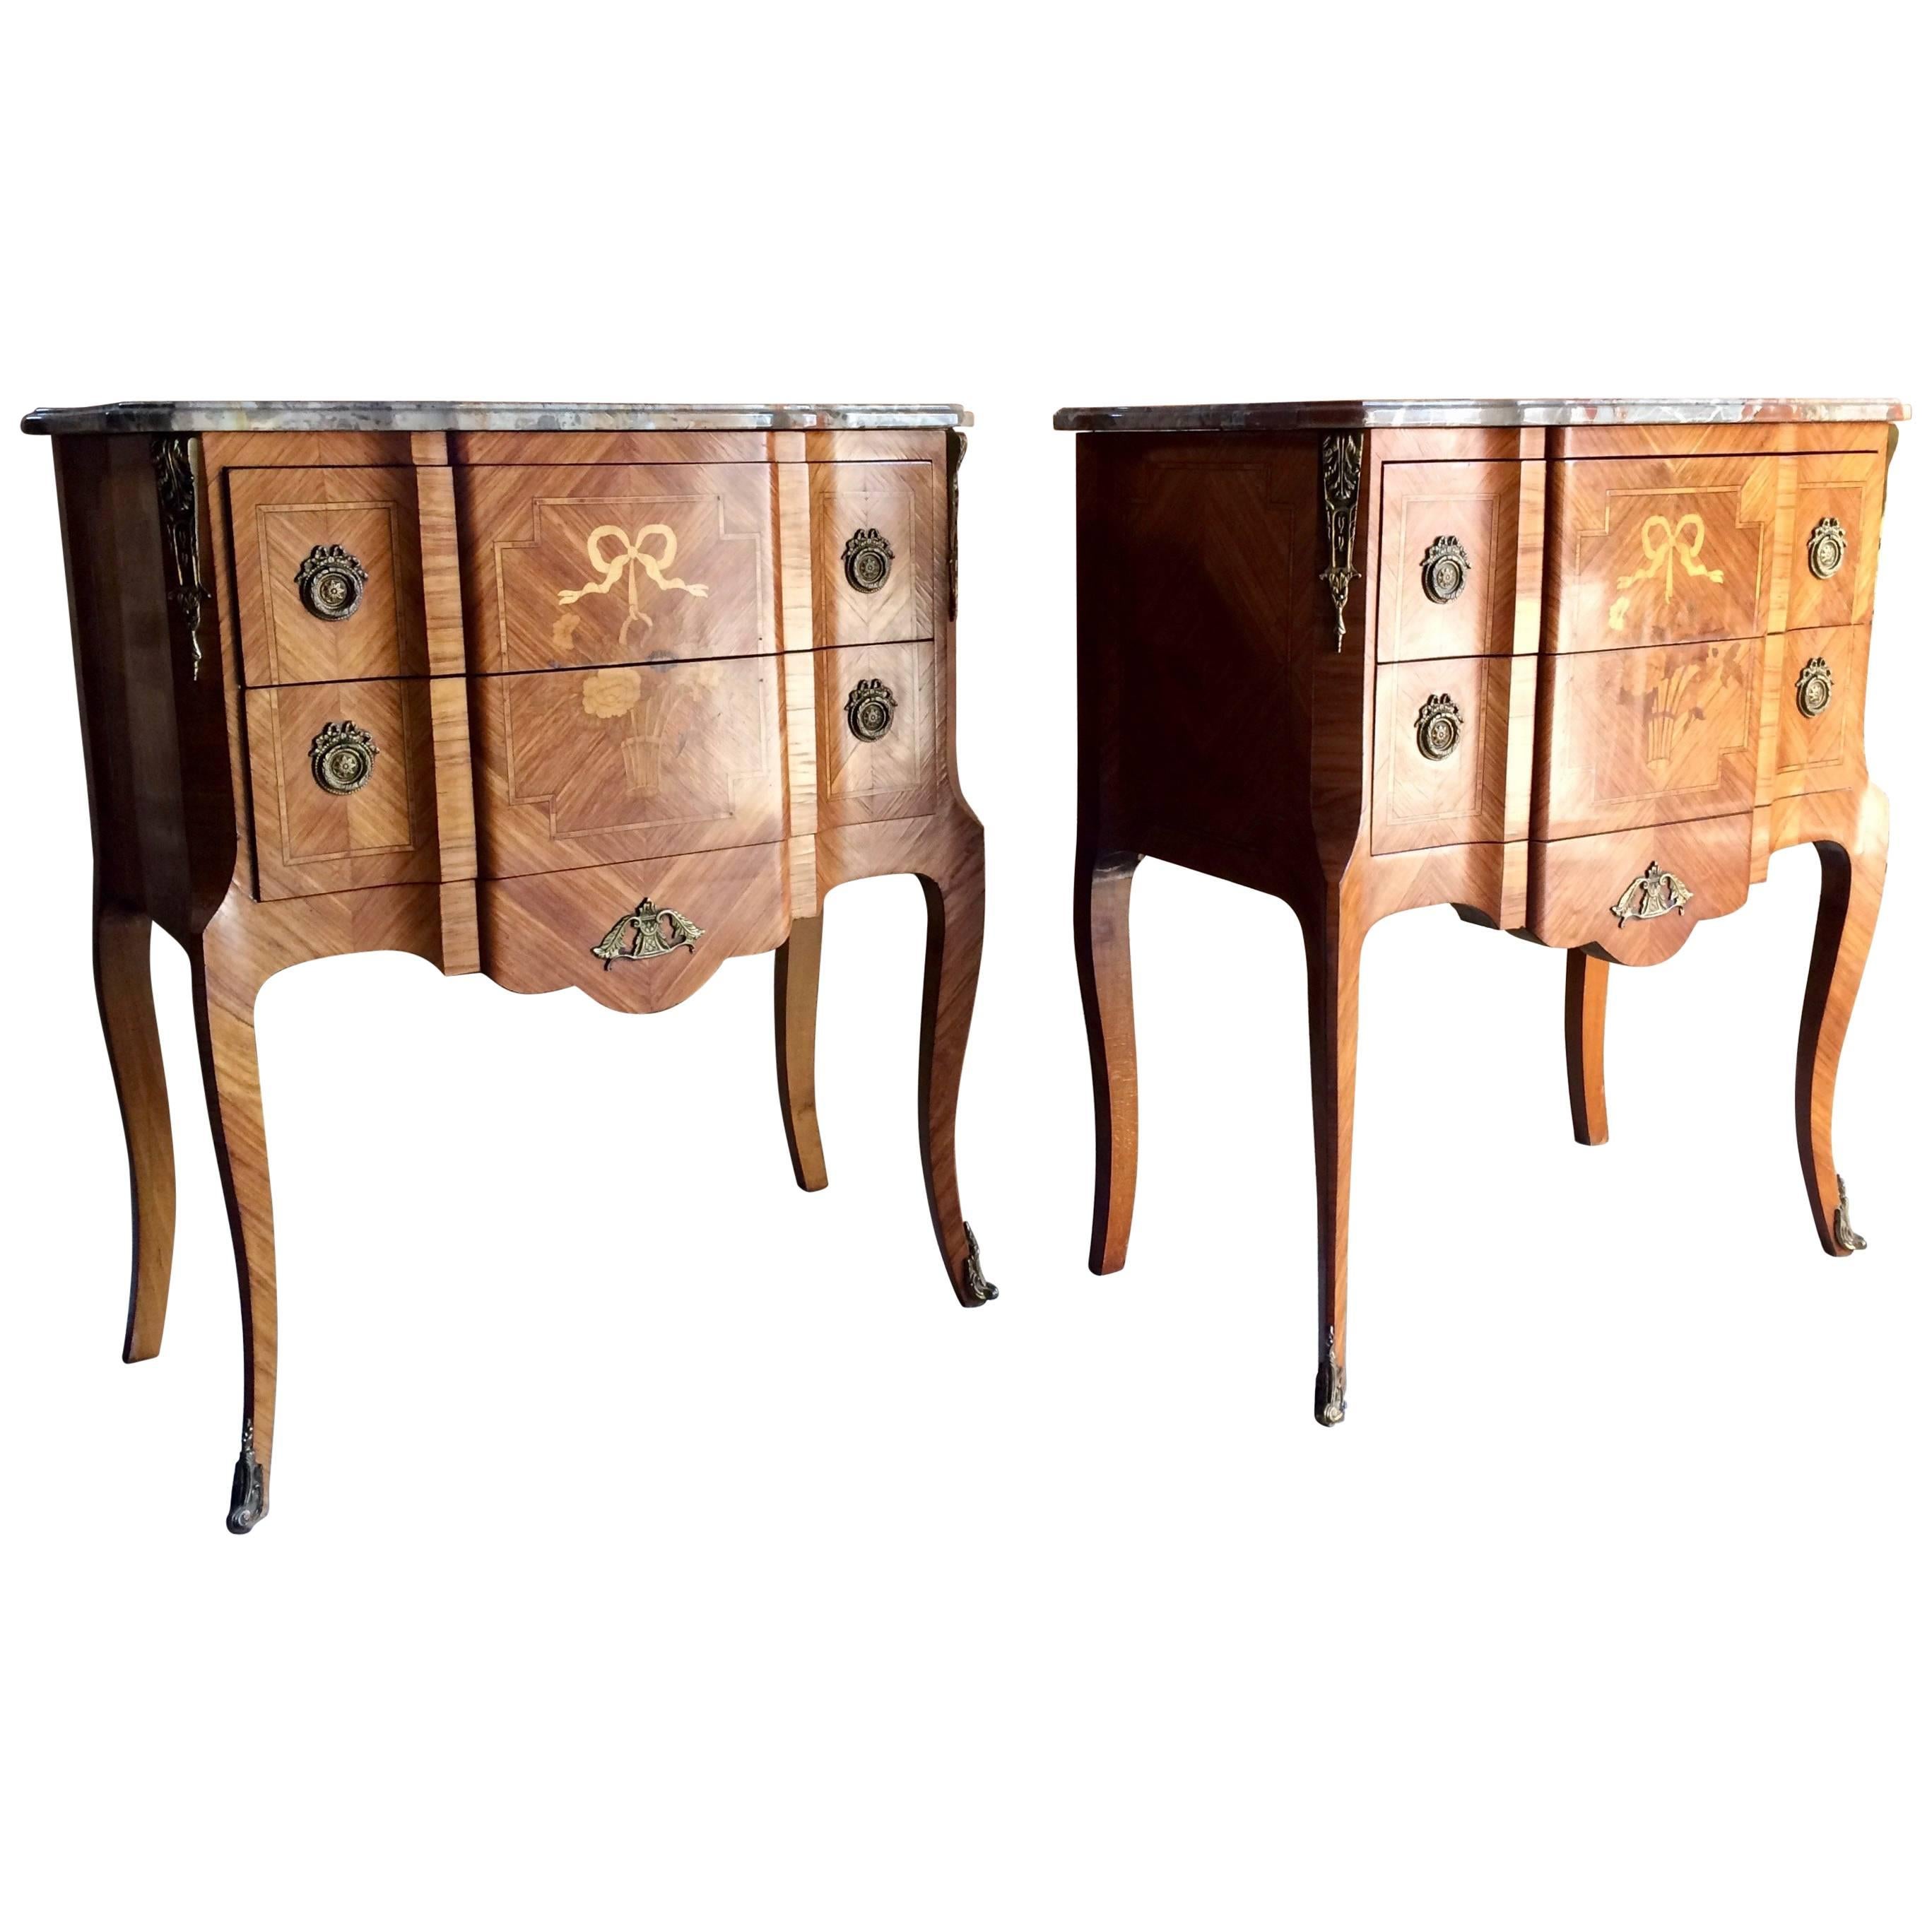 Pair of Magnificent French Bedside Tables or Nightstands in Louis XV Style